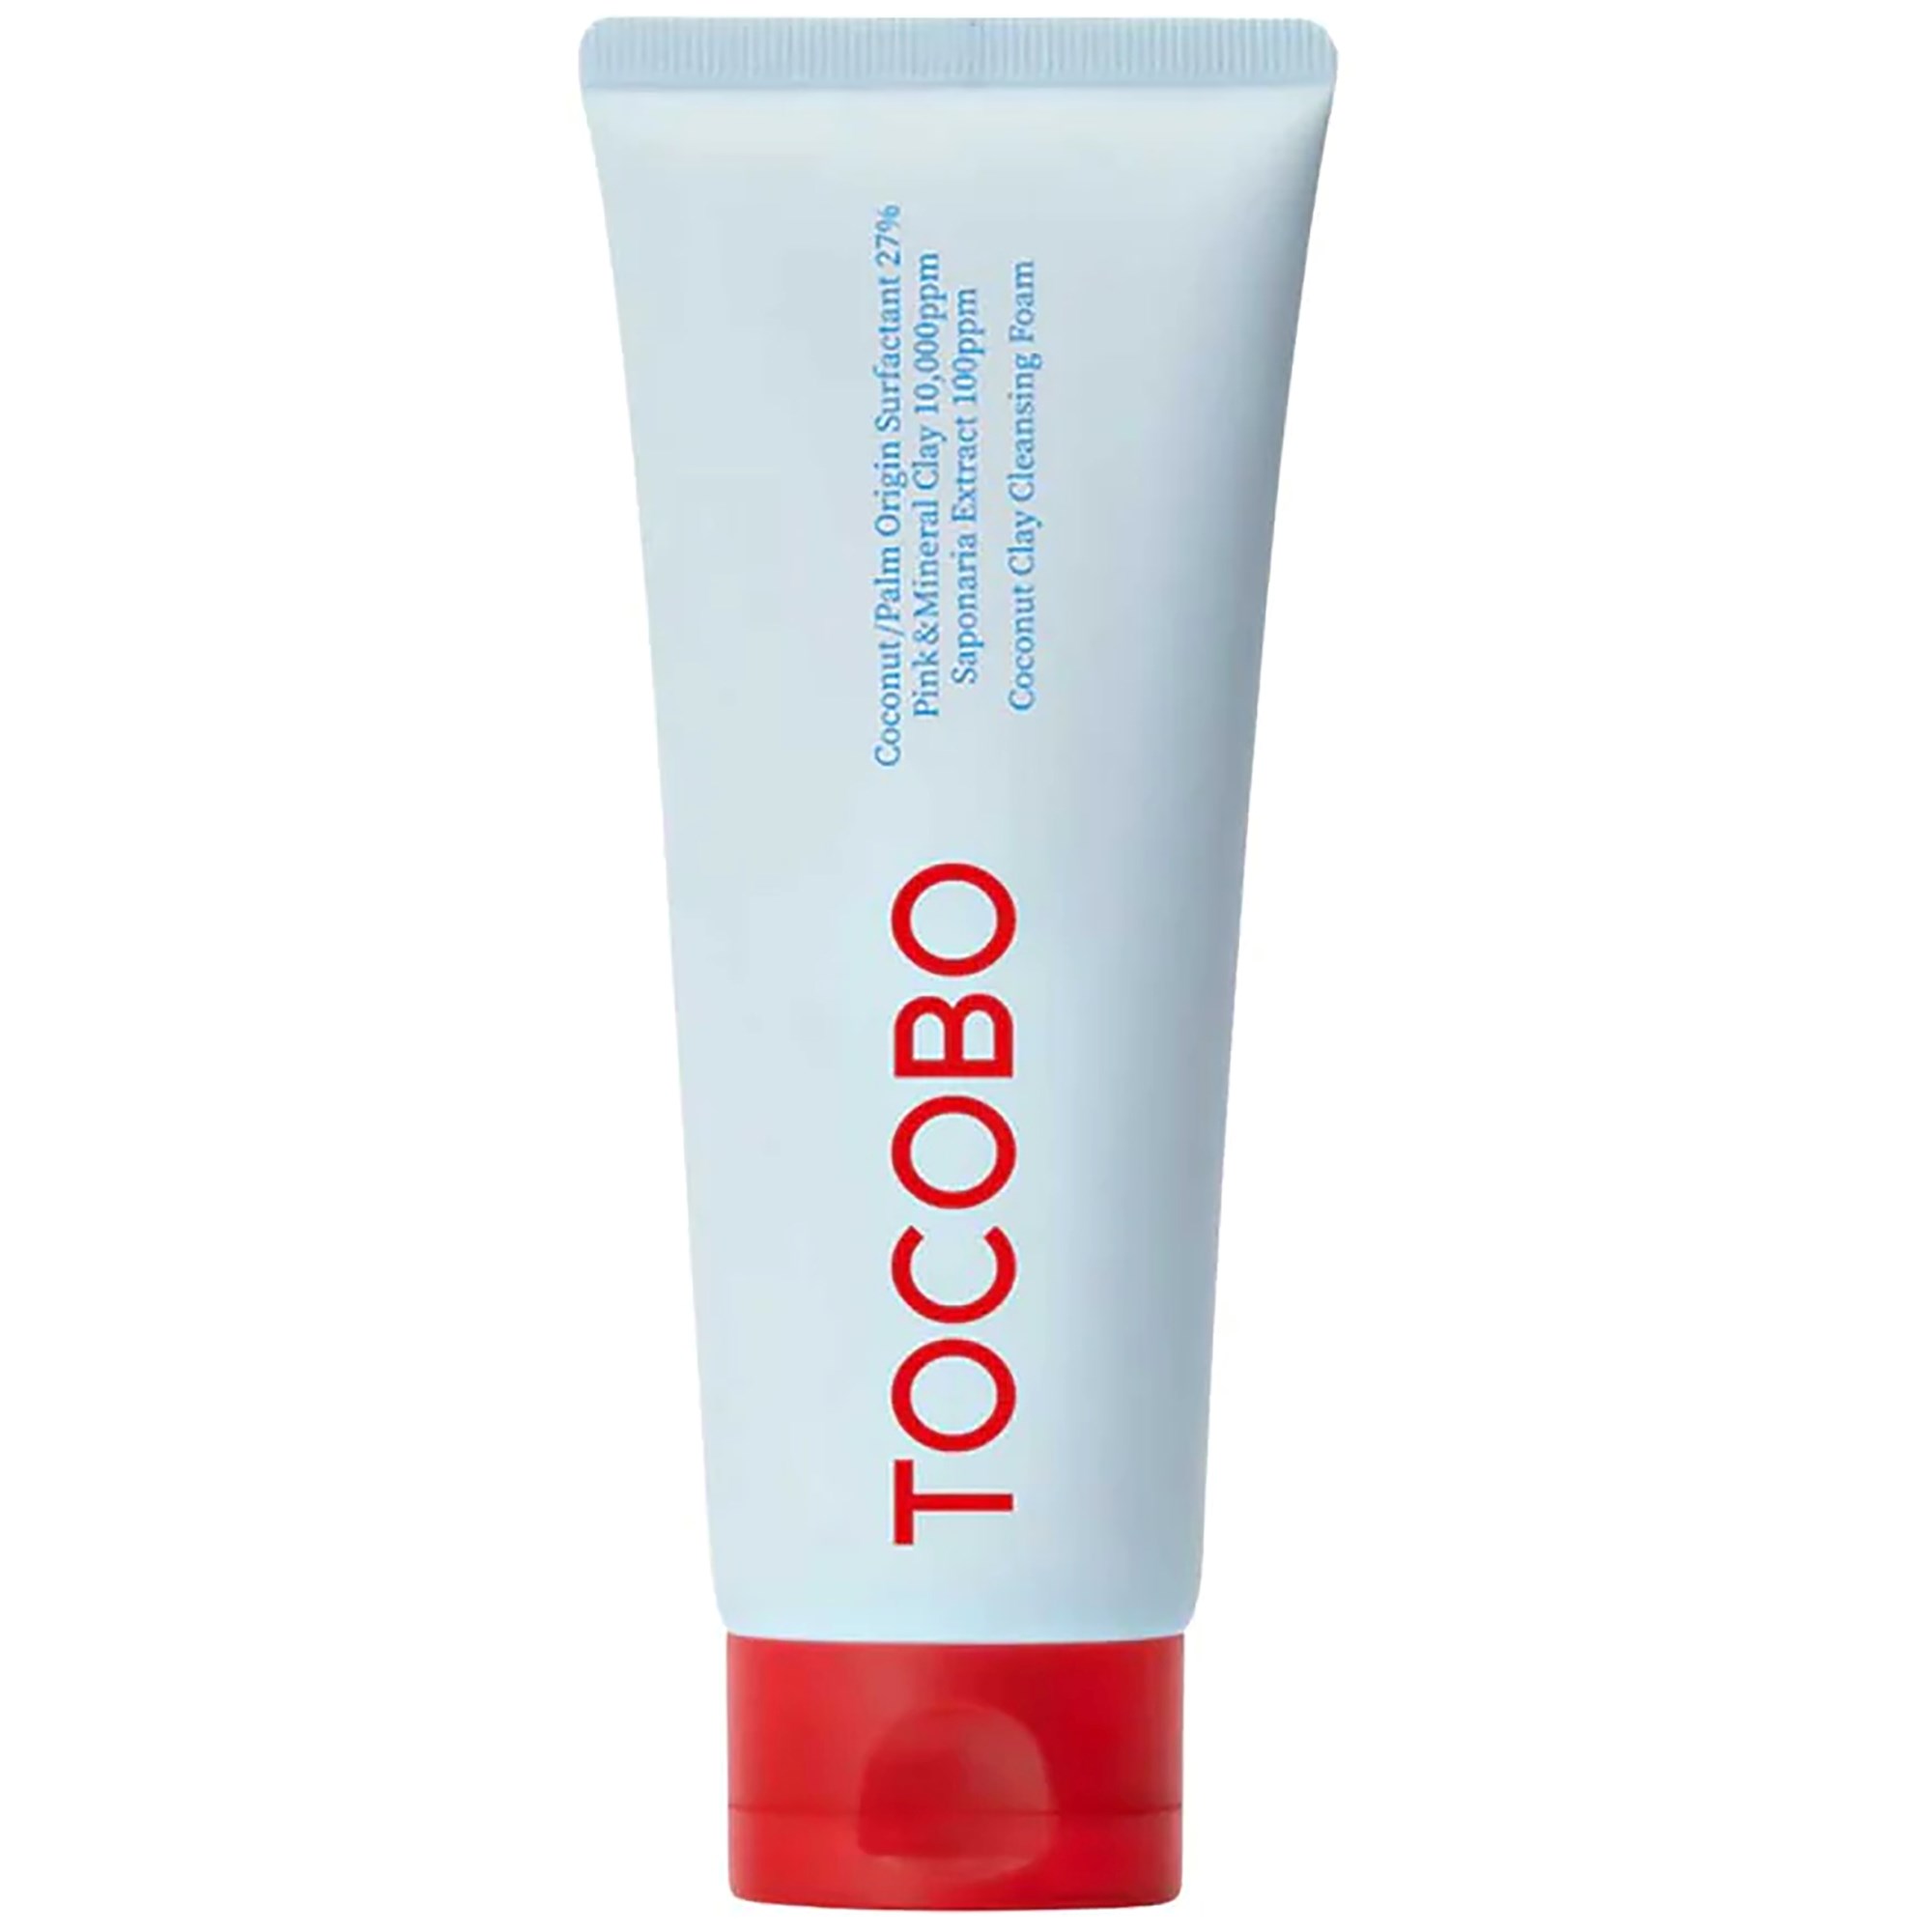 Tocobo Coconut Clay Cleansing Foam 150 ml